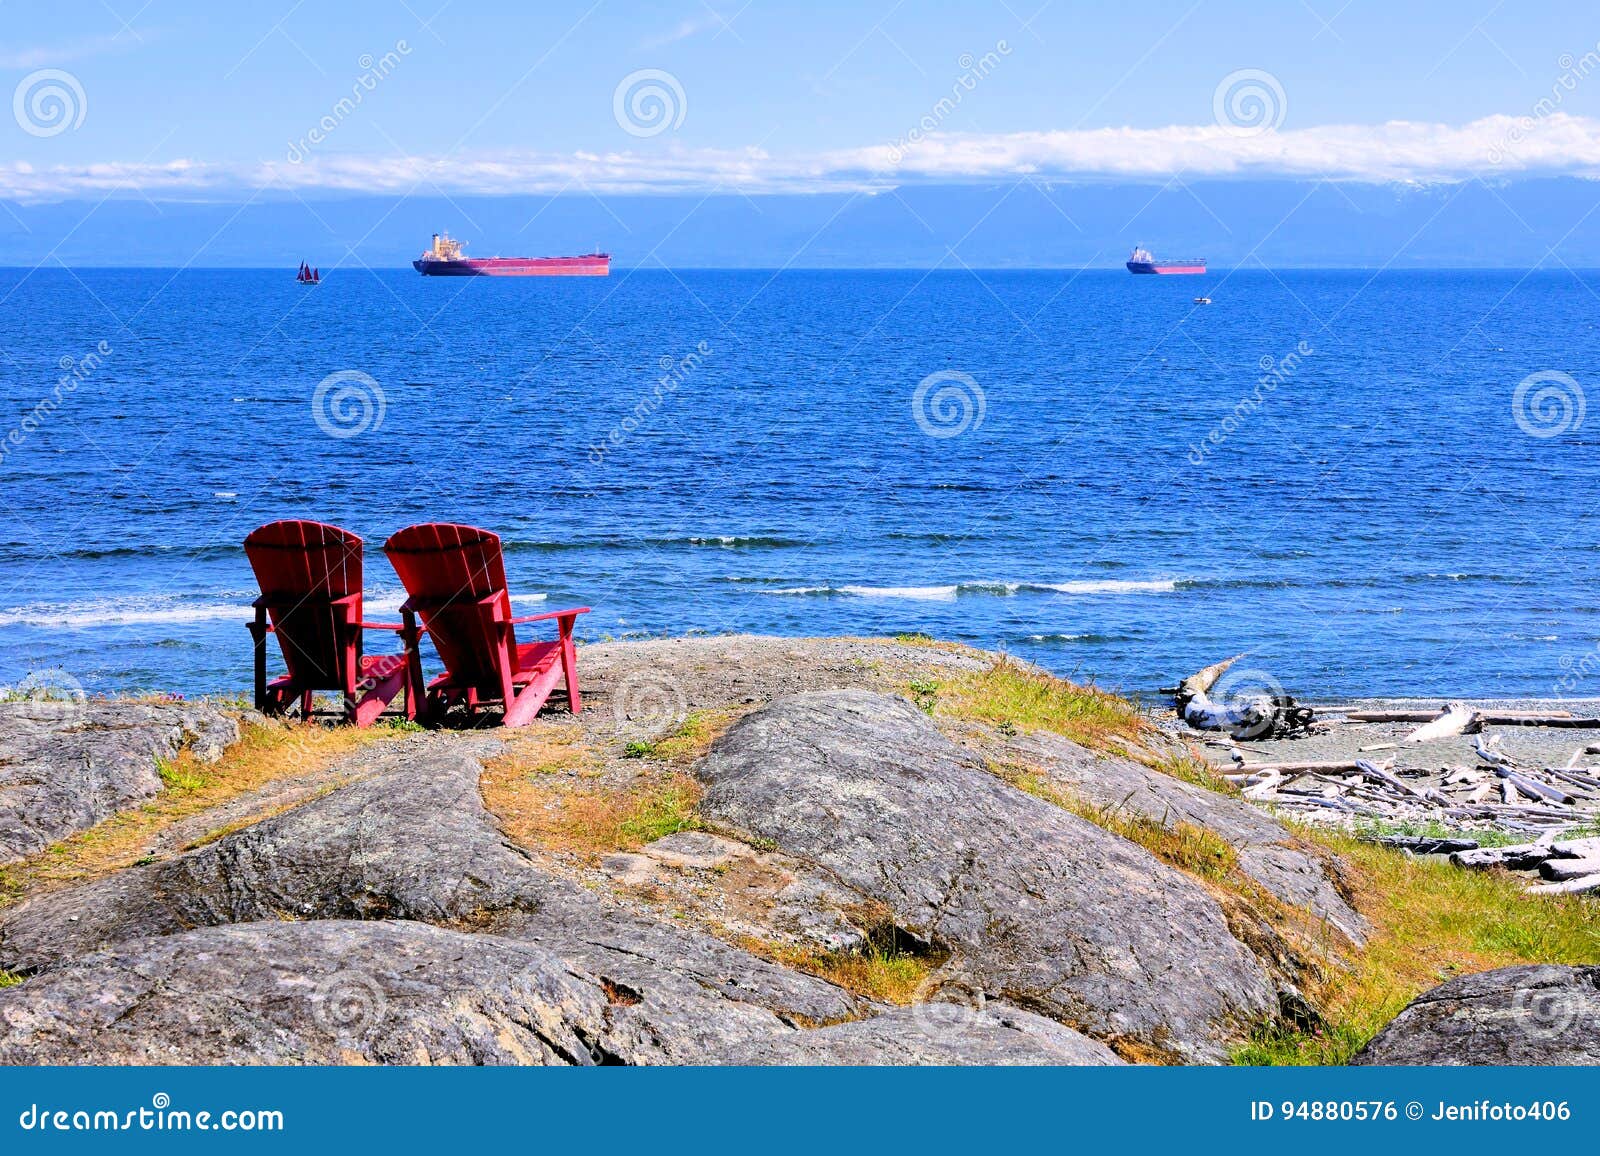 Red Wooden Chairs Overlooking The Ocean Stock Photo 